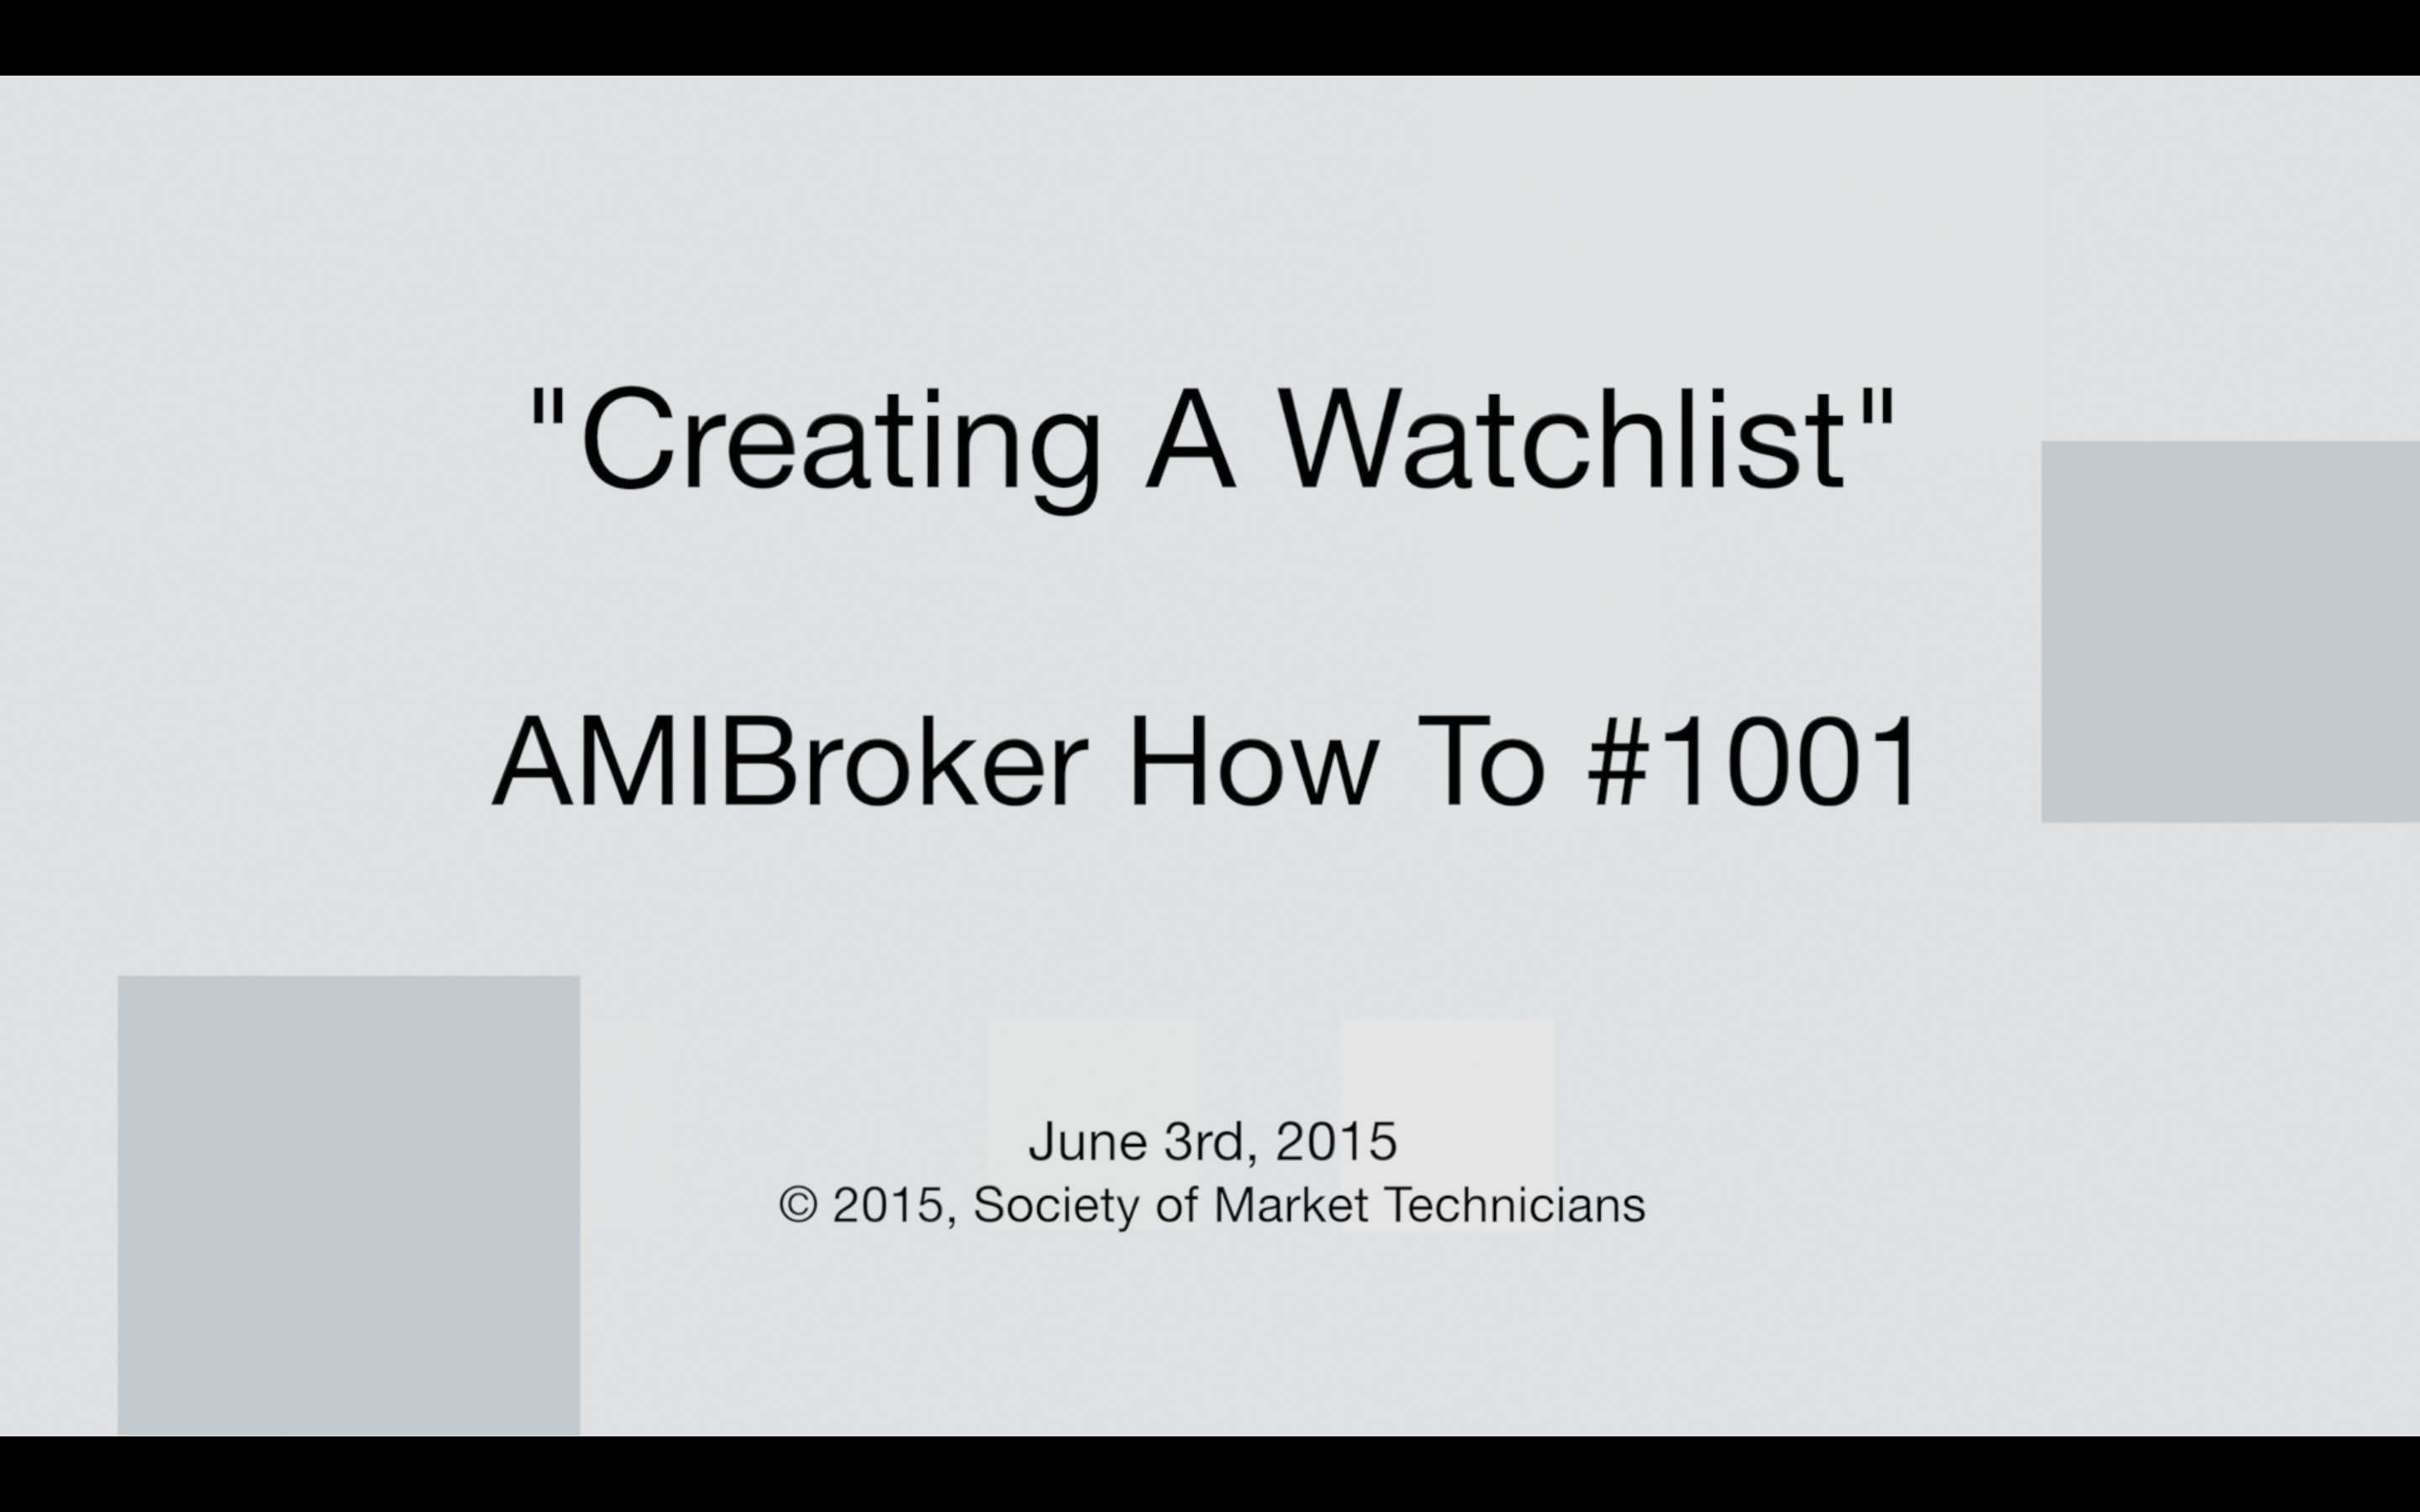 HowTo #1001: “Creating A Watchlist”